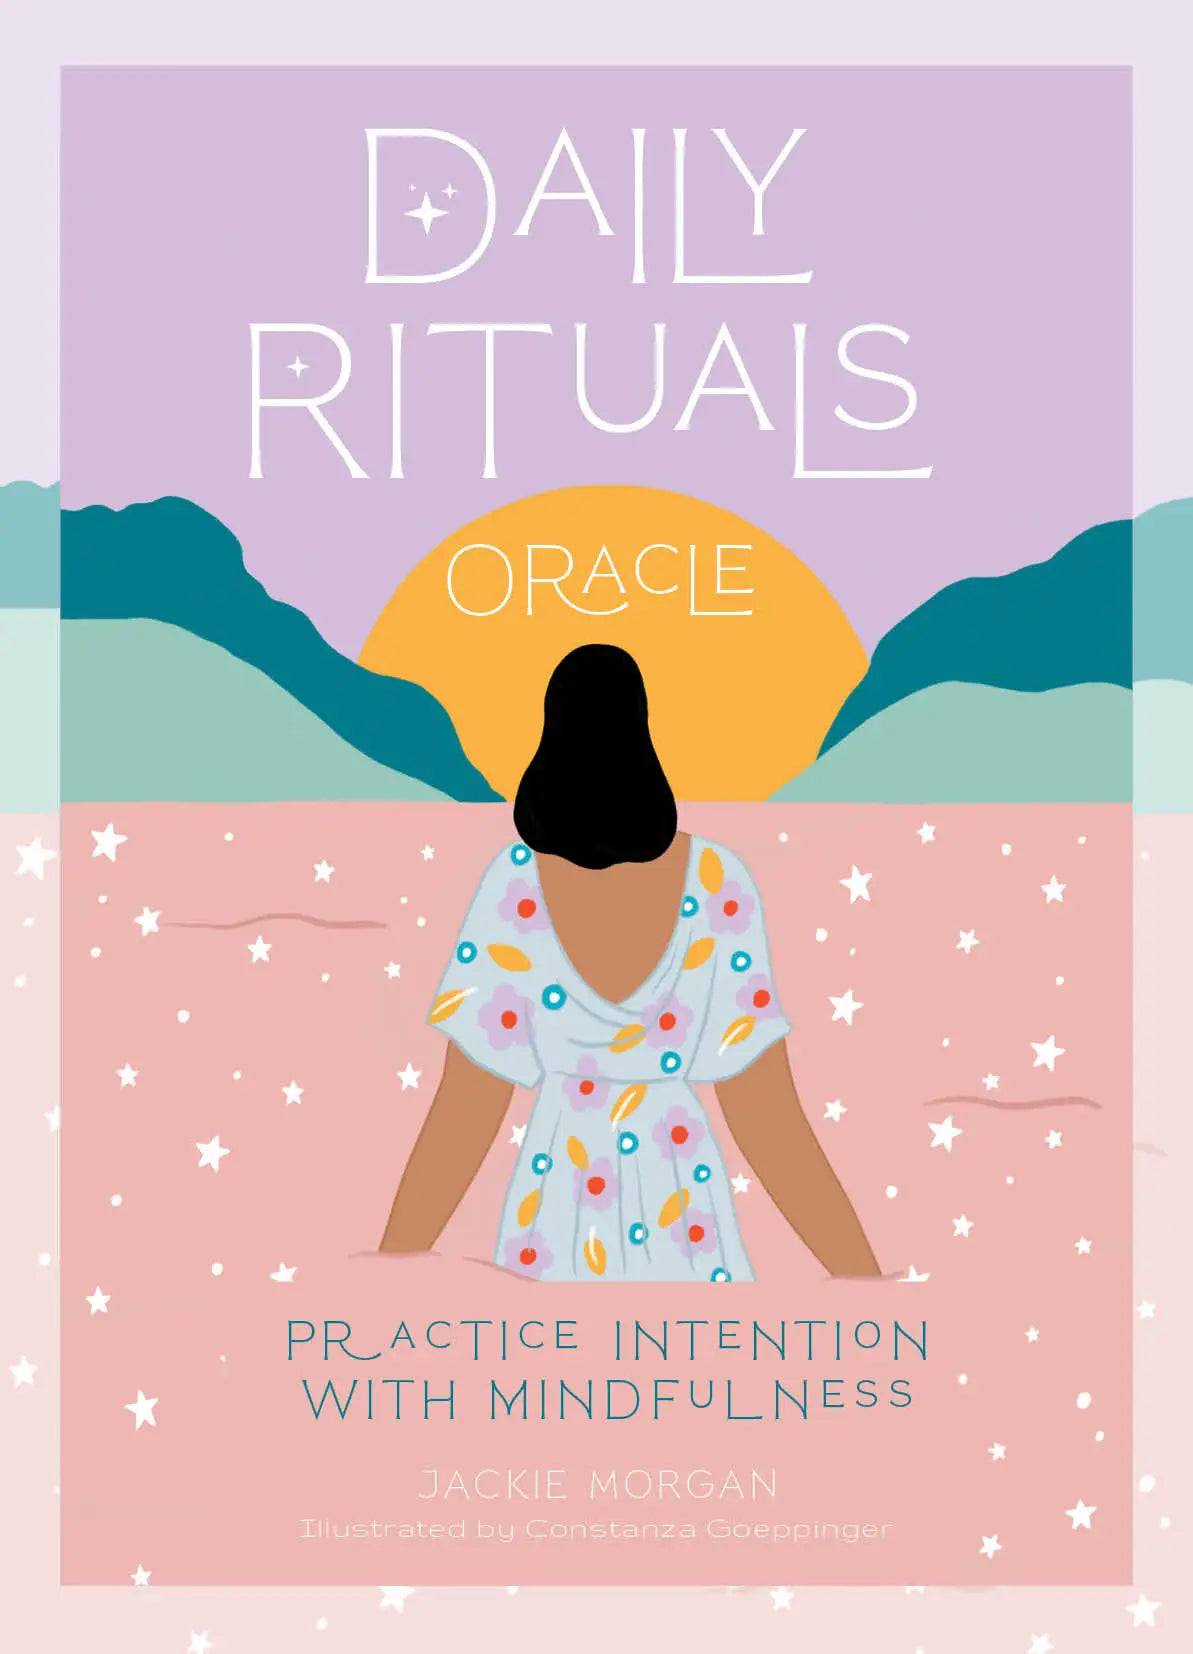 Daily Rituals Oracle Cards - Moon Room Shop and Wellness